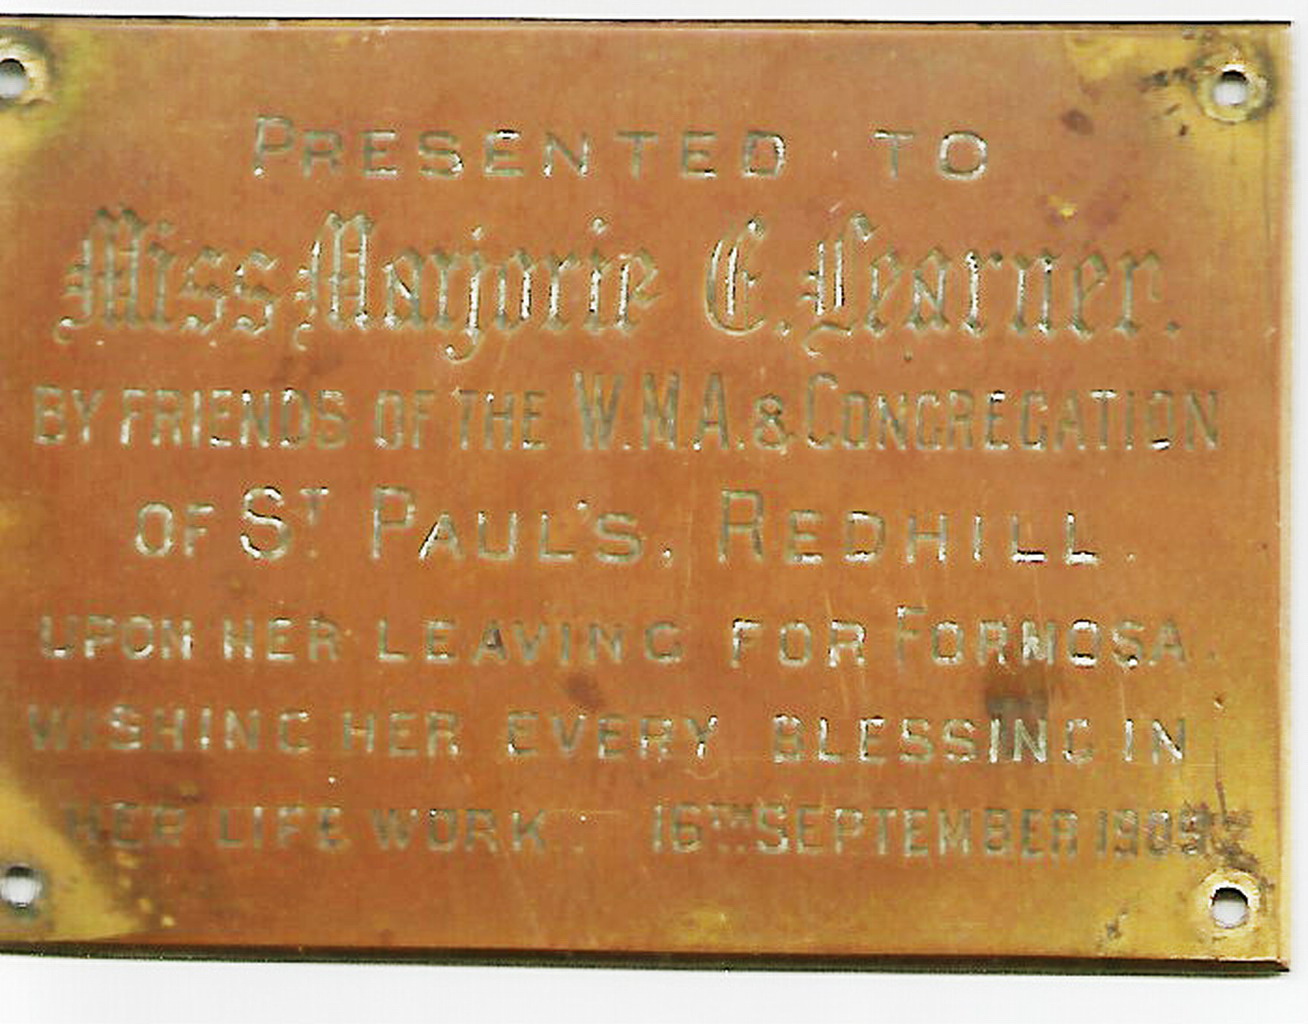 gift plate to Marjorie by st paul church.jpg